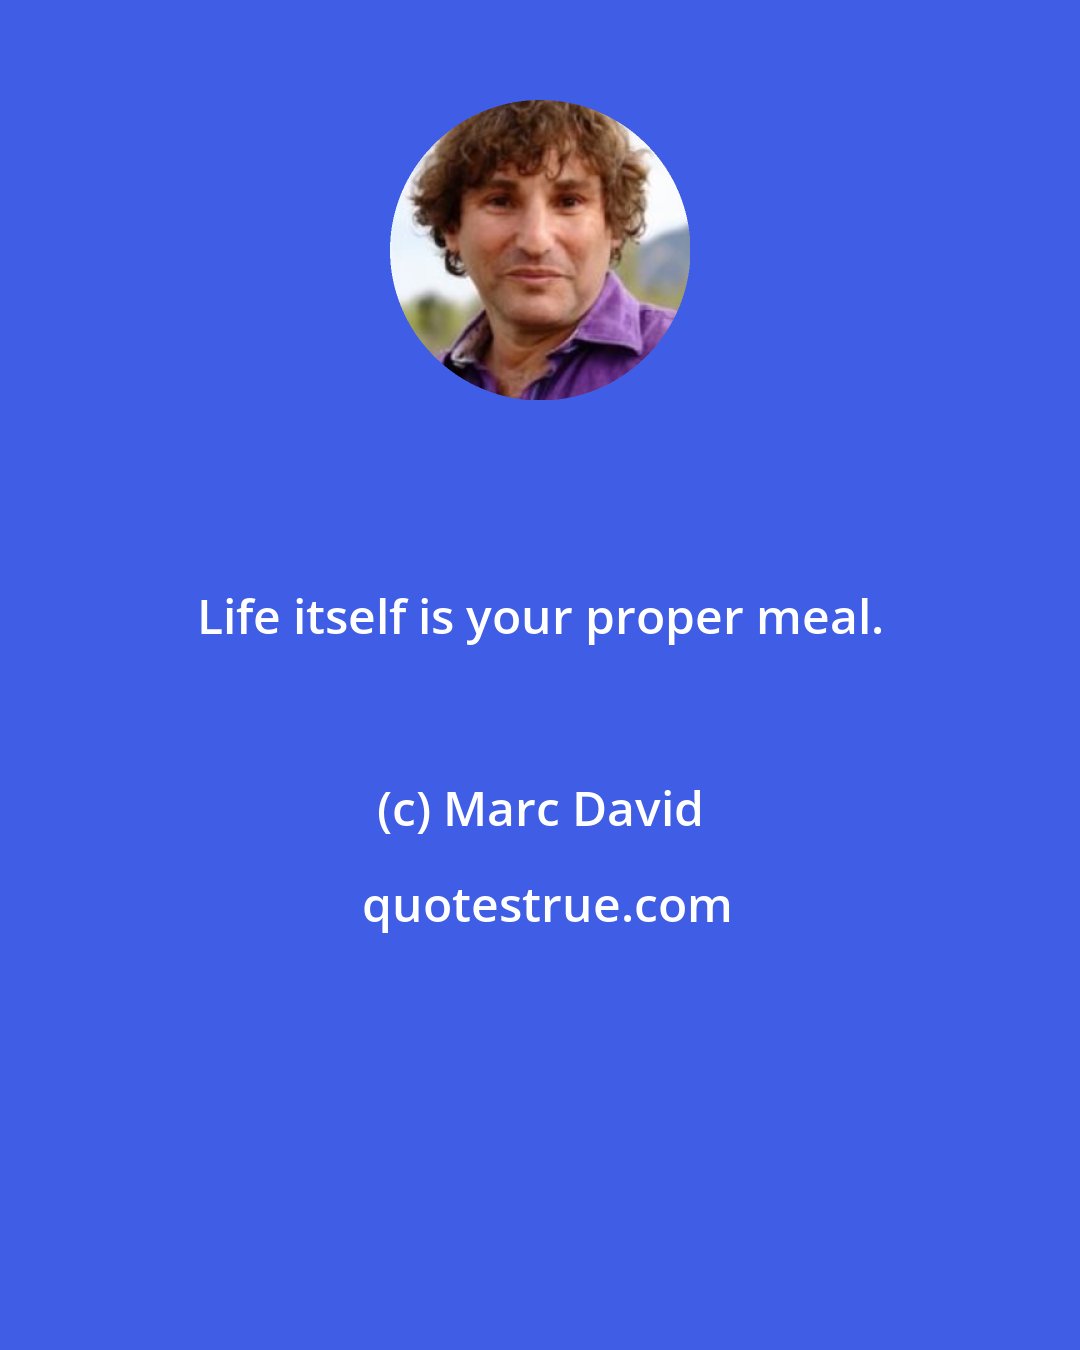 Marc David: Life itself is your proper meal.